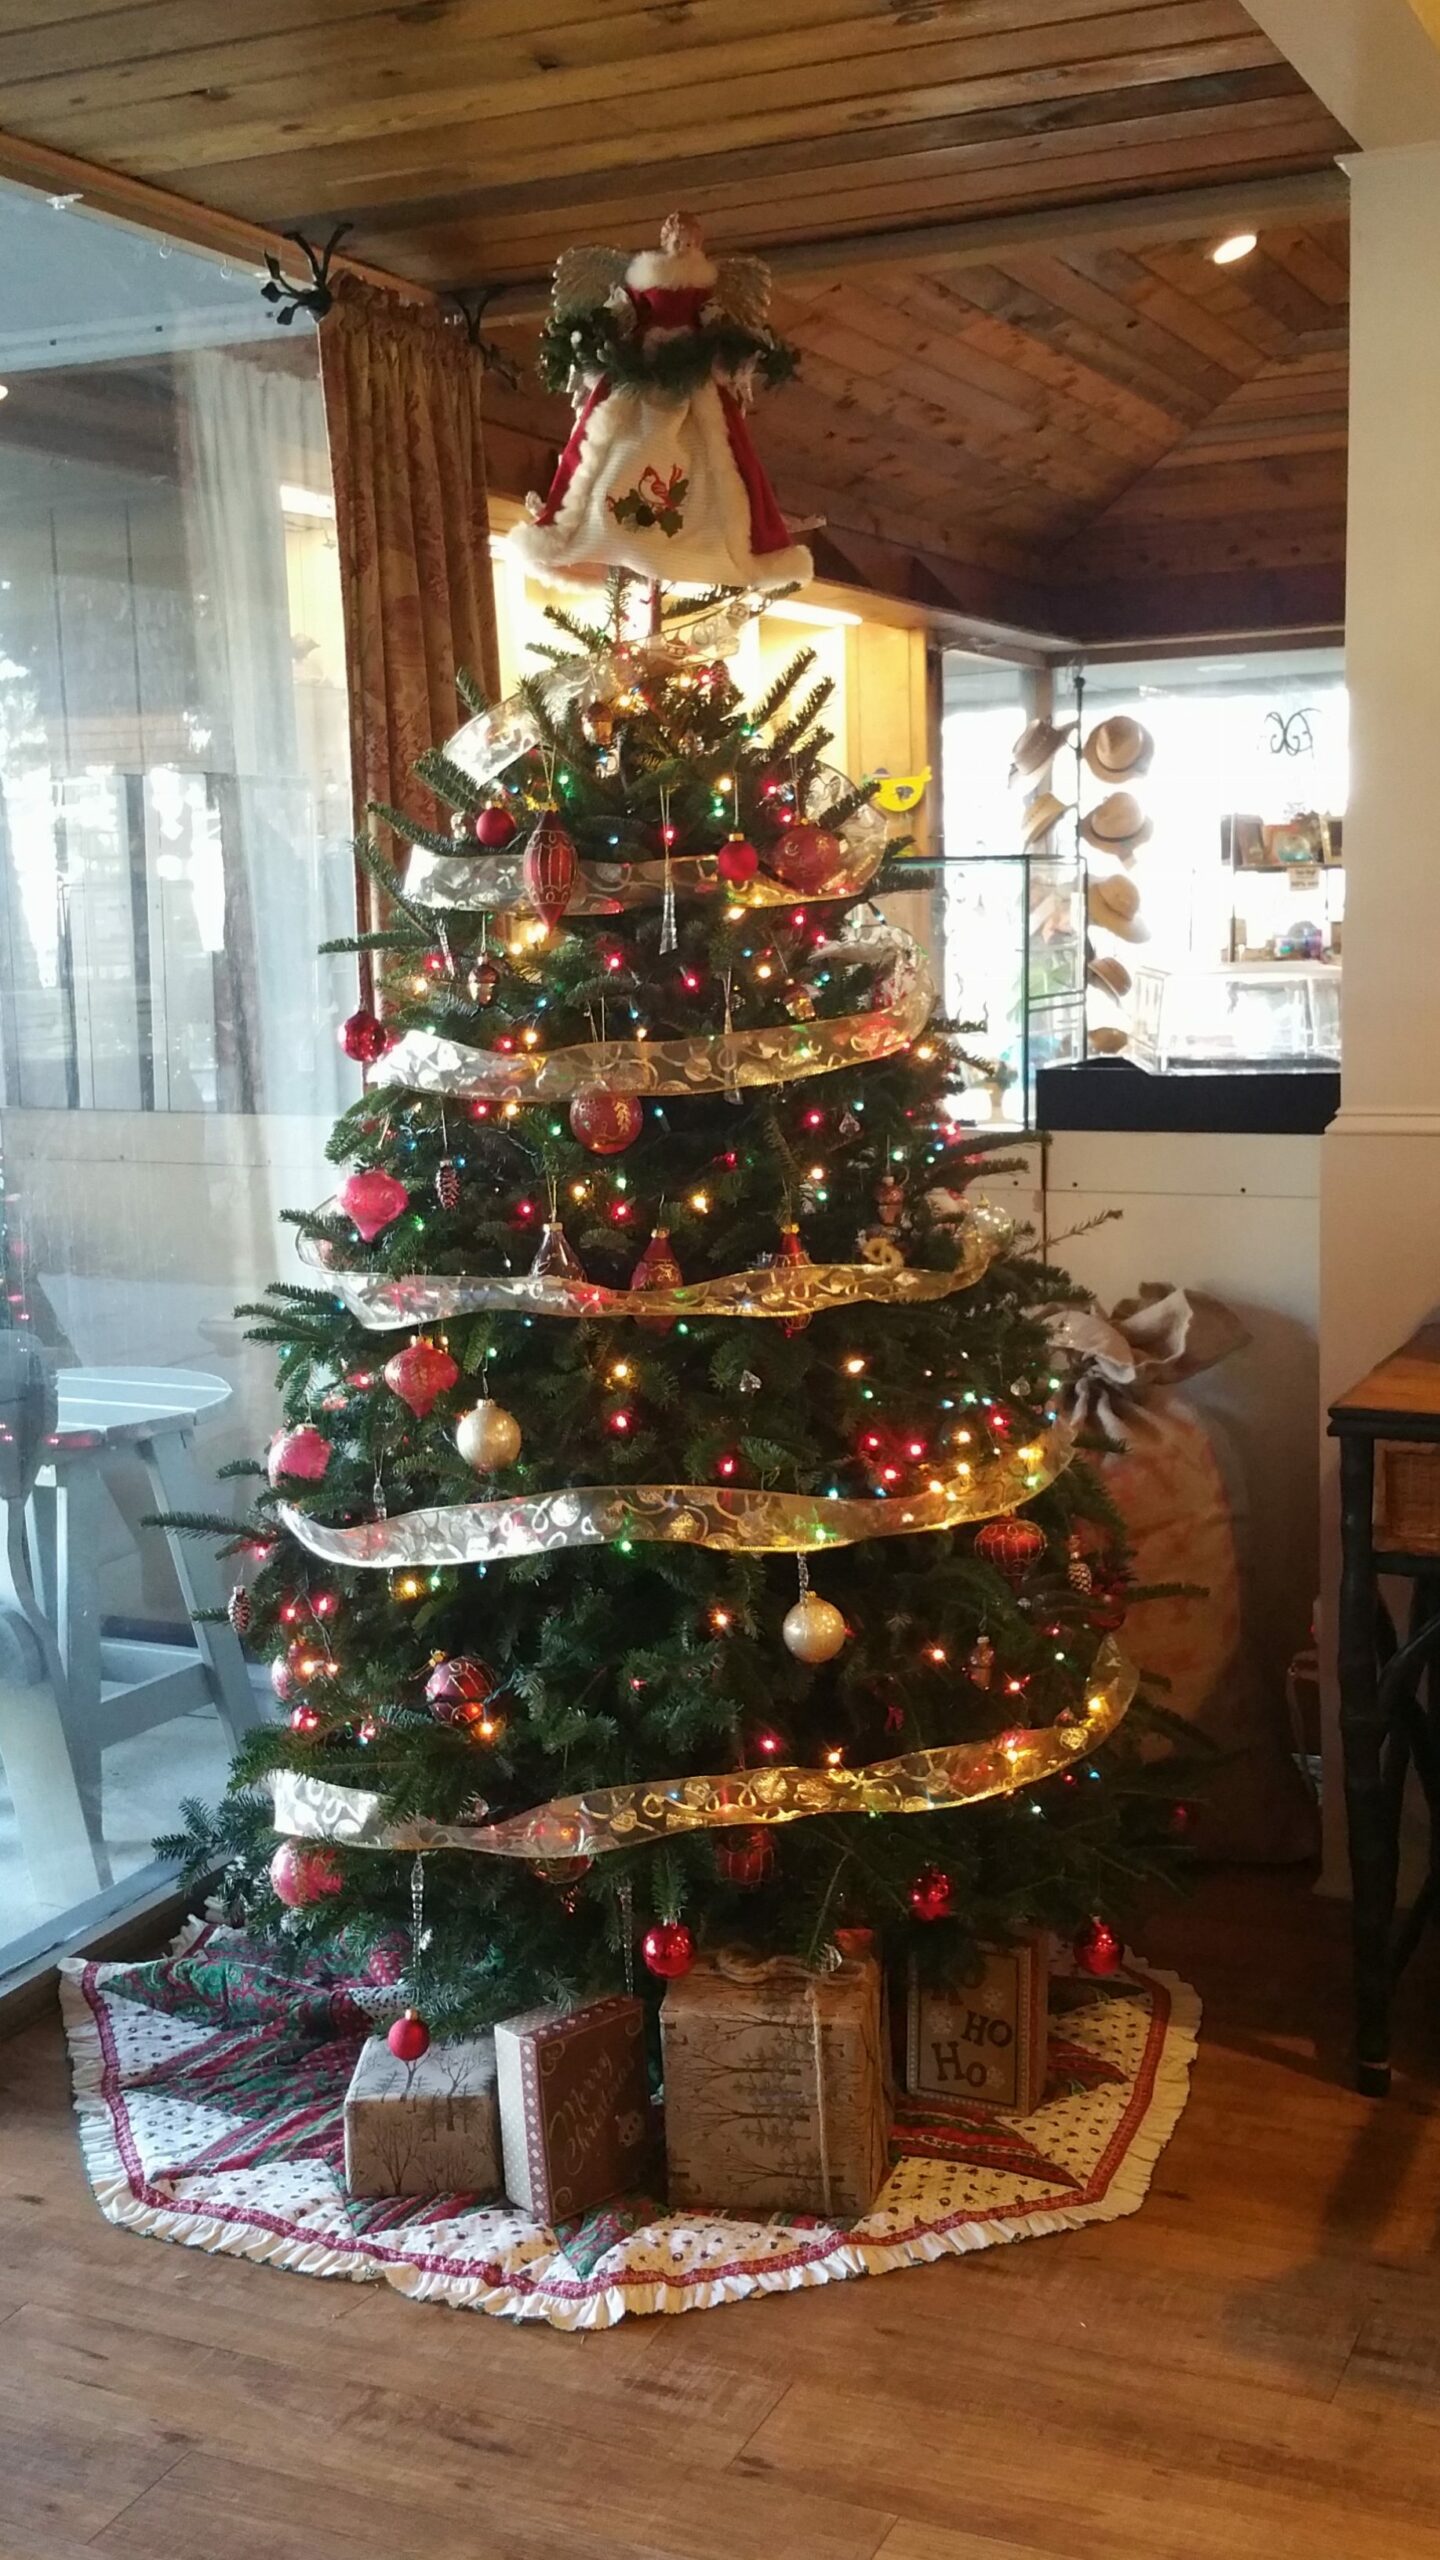 Our beautiful tree this year.  Thank you to the front desk girls for doing such a great job!